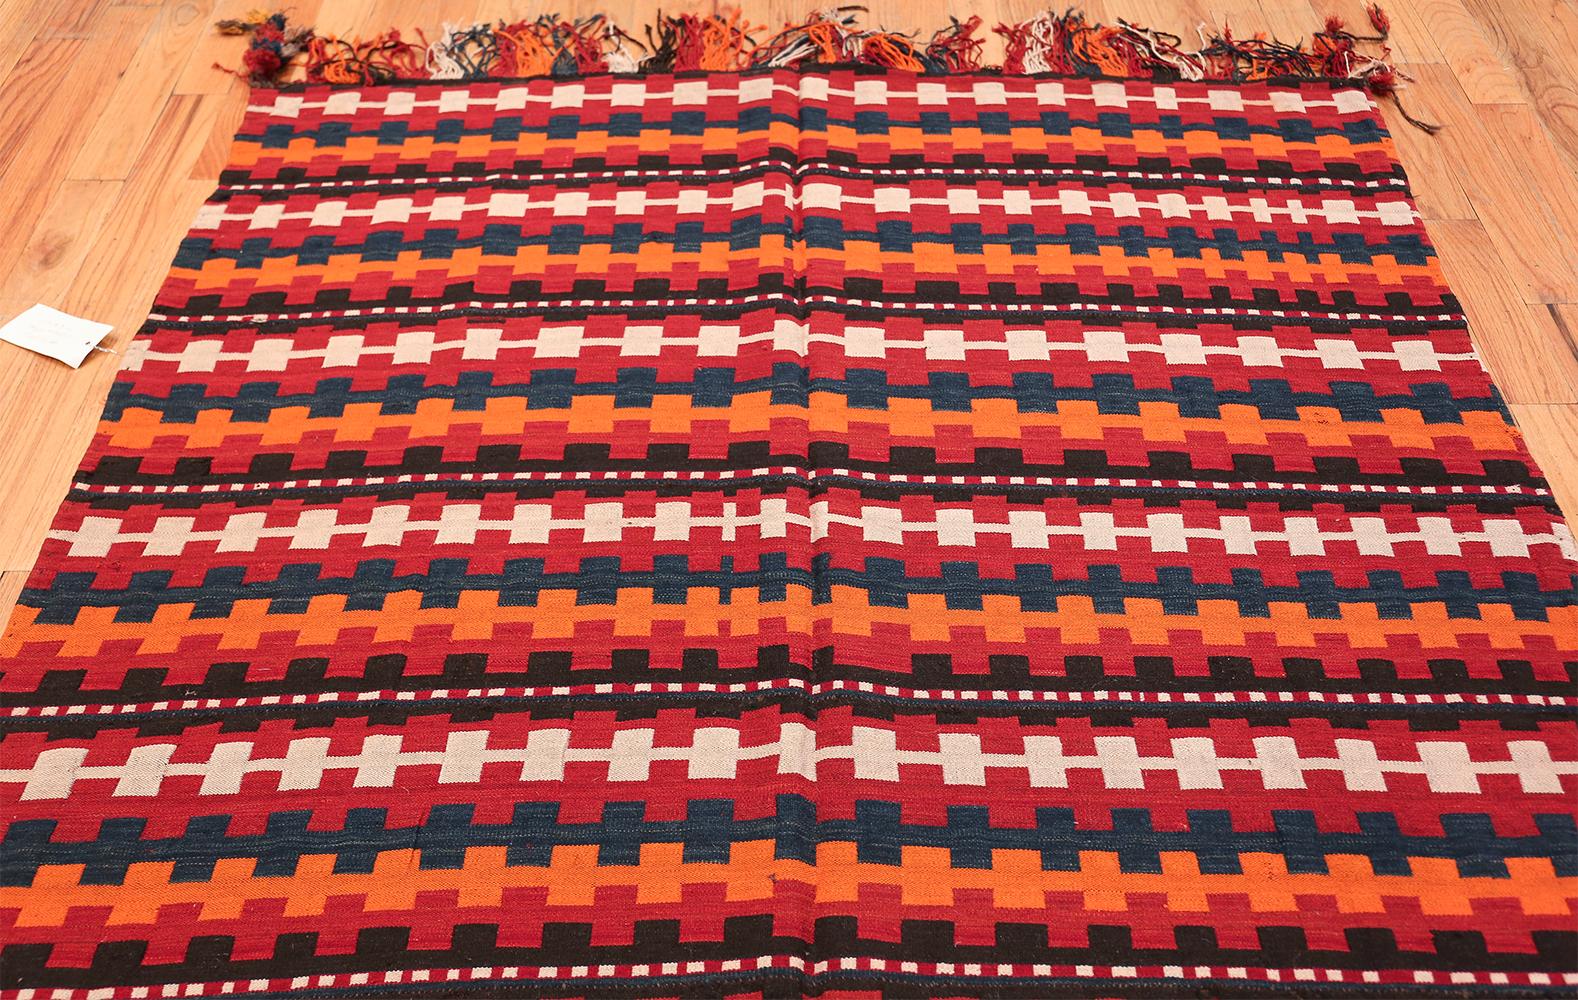 Hand-Woven Vintage Tribal Caucasian Kilim Rug. Size: 5 ft 6 in x 9 ft (1.68 m x 2.74 m)